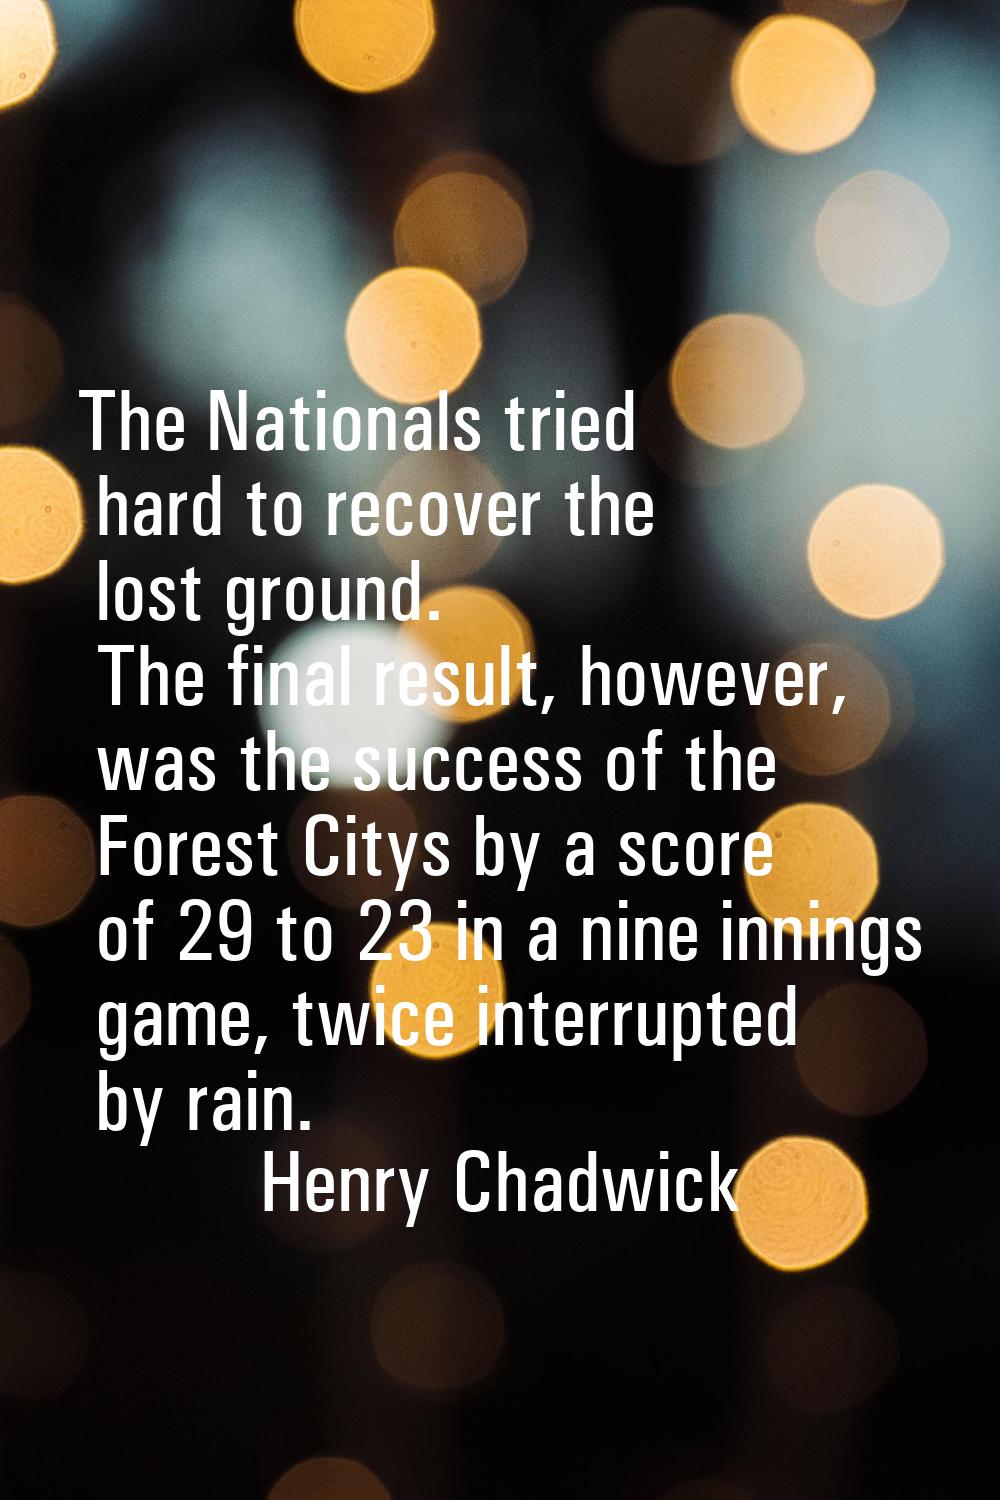 The Nationals tried hard to recover the lost ground. The final result, however, was the success of 